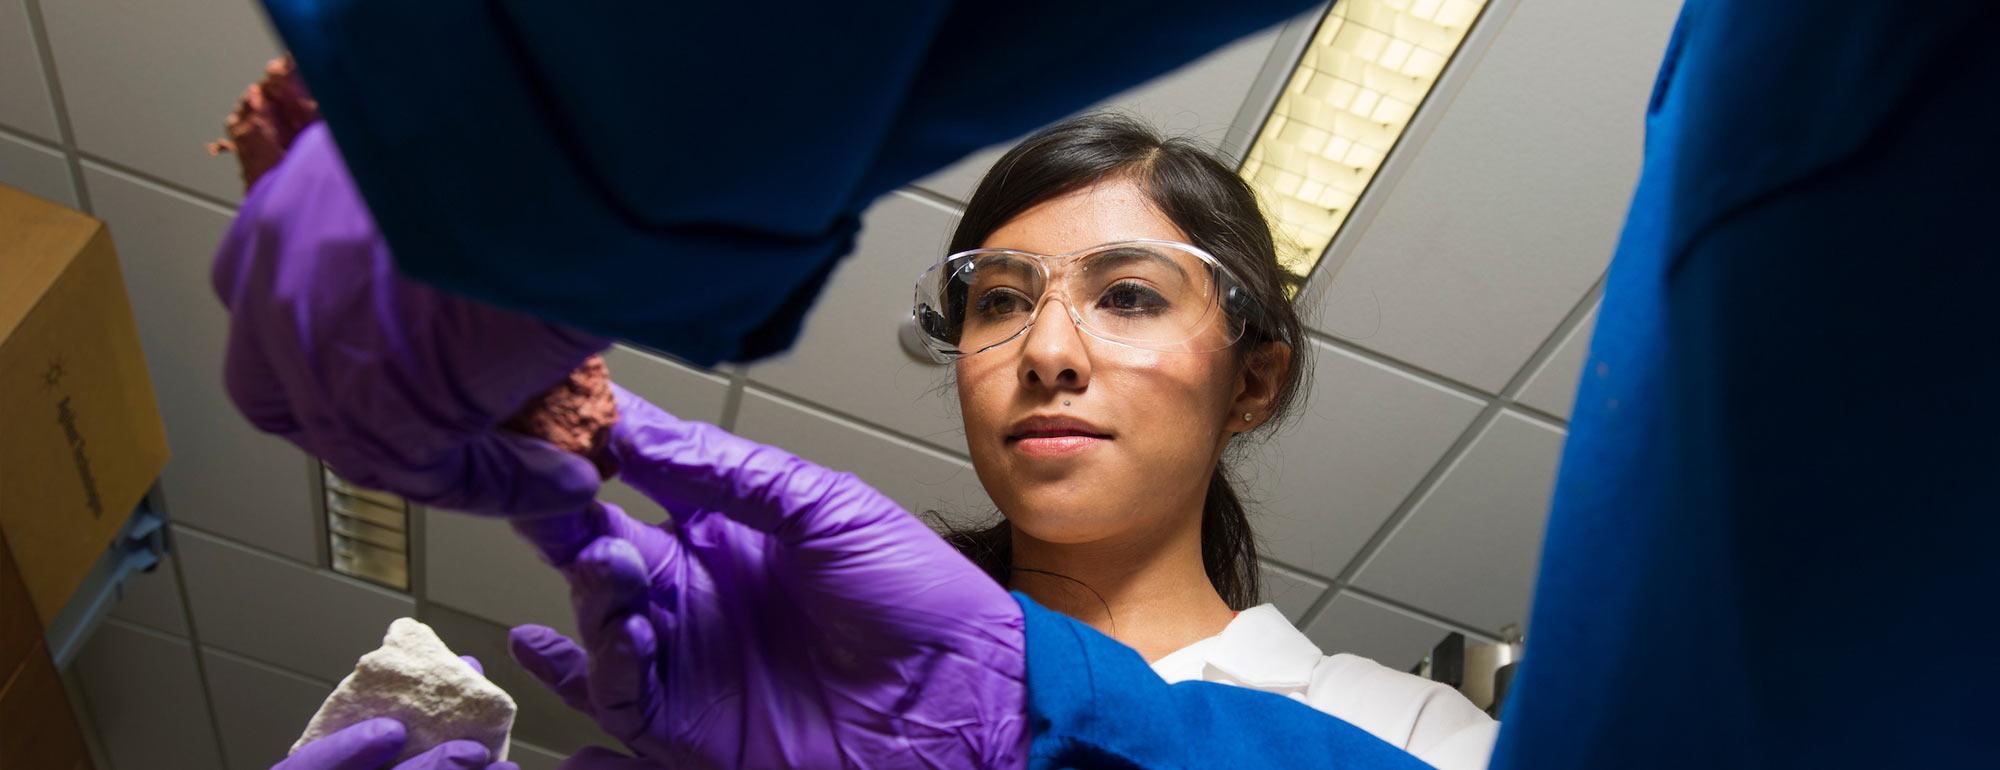 A female student works with a researcher in a lab on the ϲʿͼ campus